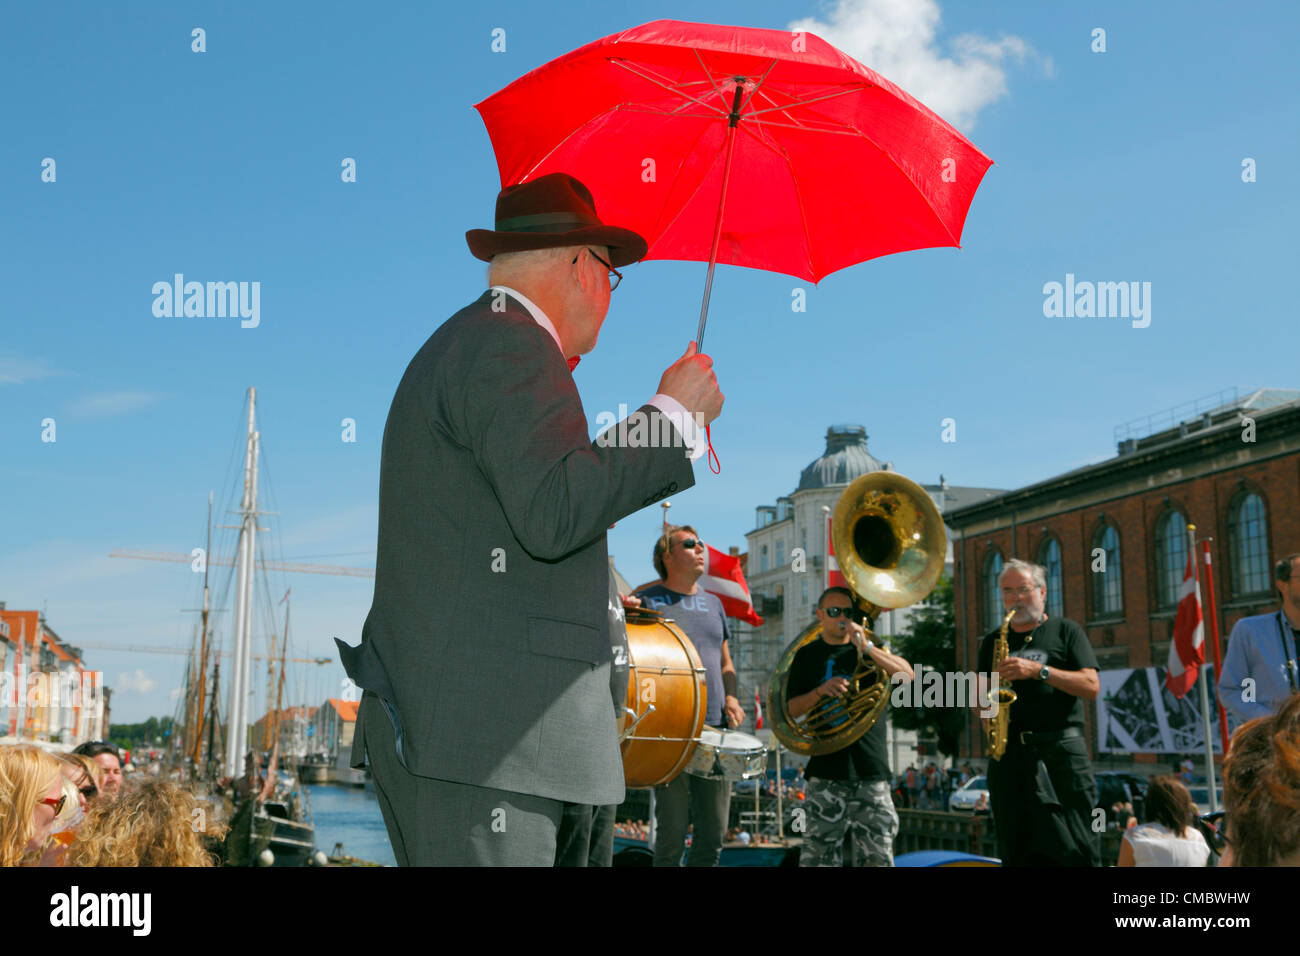 July Friday 13, 2012 -  The popular street parade and traditional jazz band - The Orion Brass Band playing with performer and atmosphere creator in crowded Nyhavn, Copenhagen, Denmark, on a hot and sunny Friday afternoon full of tourists during The Copenhagen Jazz Festival. Stock Photo